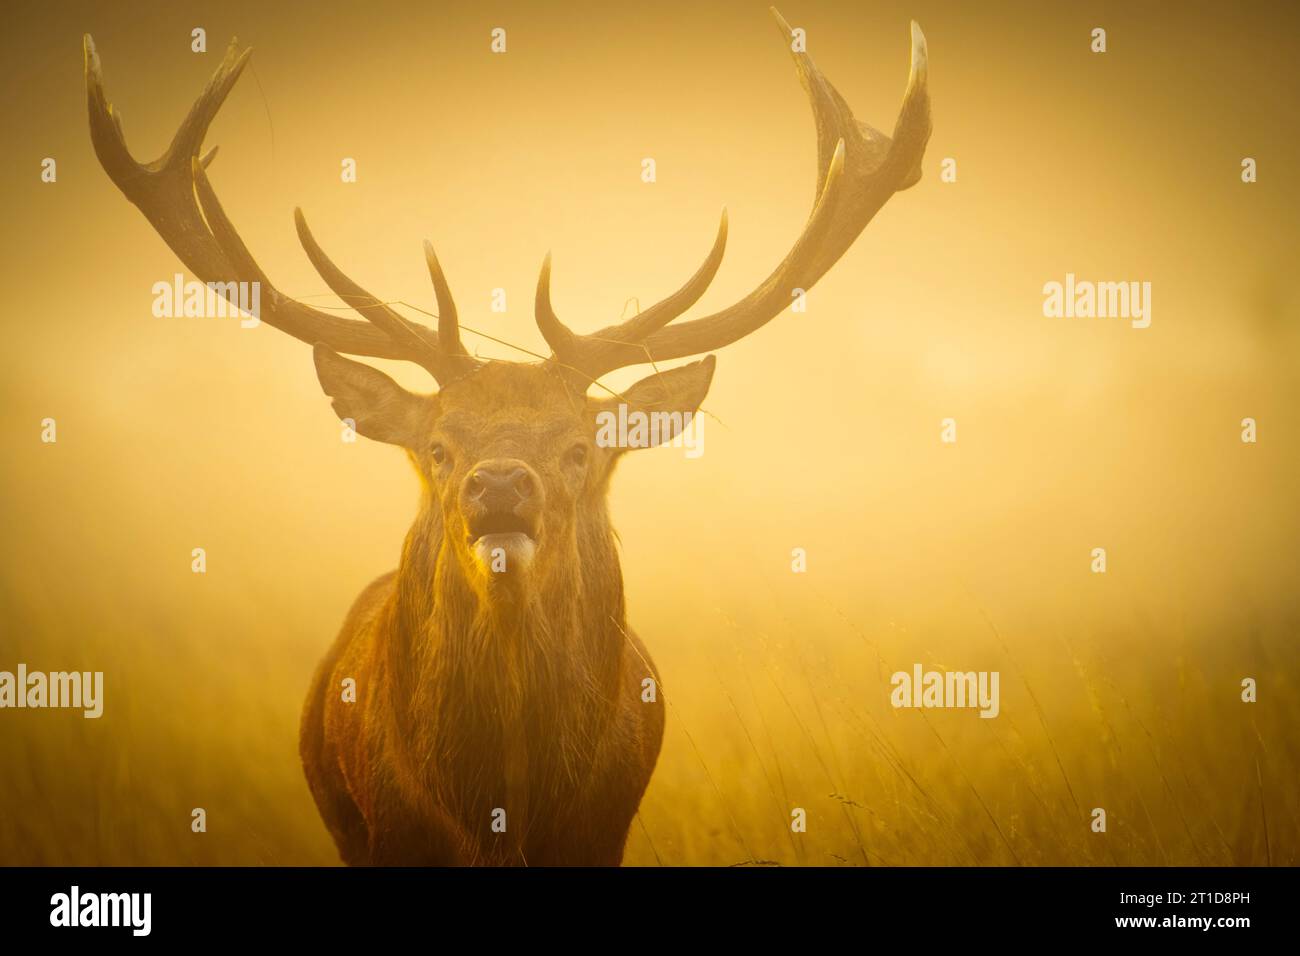 The monarch stag LONDON, ENGLAND STRIKING IMAGES of a stag bellowing in the golden hour light on October 8th have been captured.  Images show the incr Stock Photo